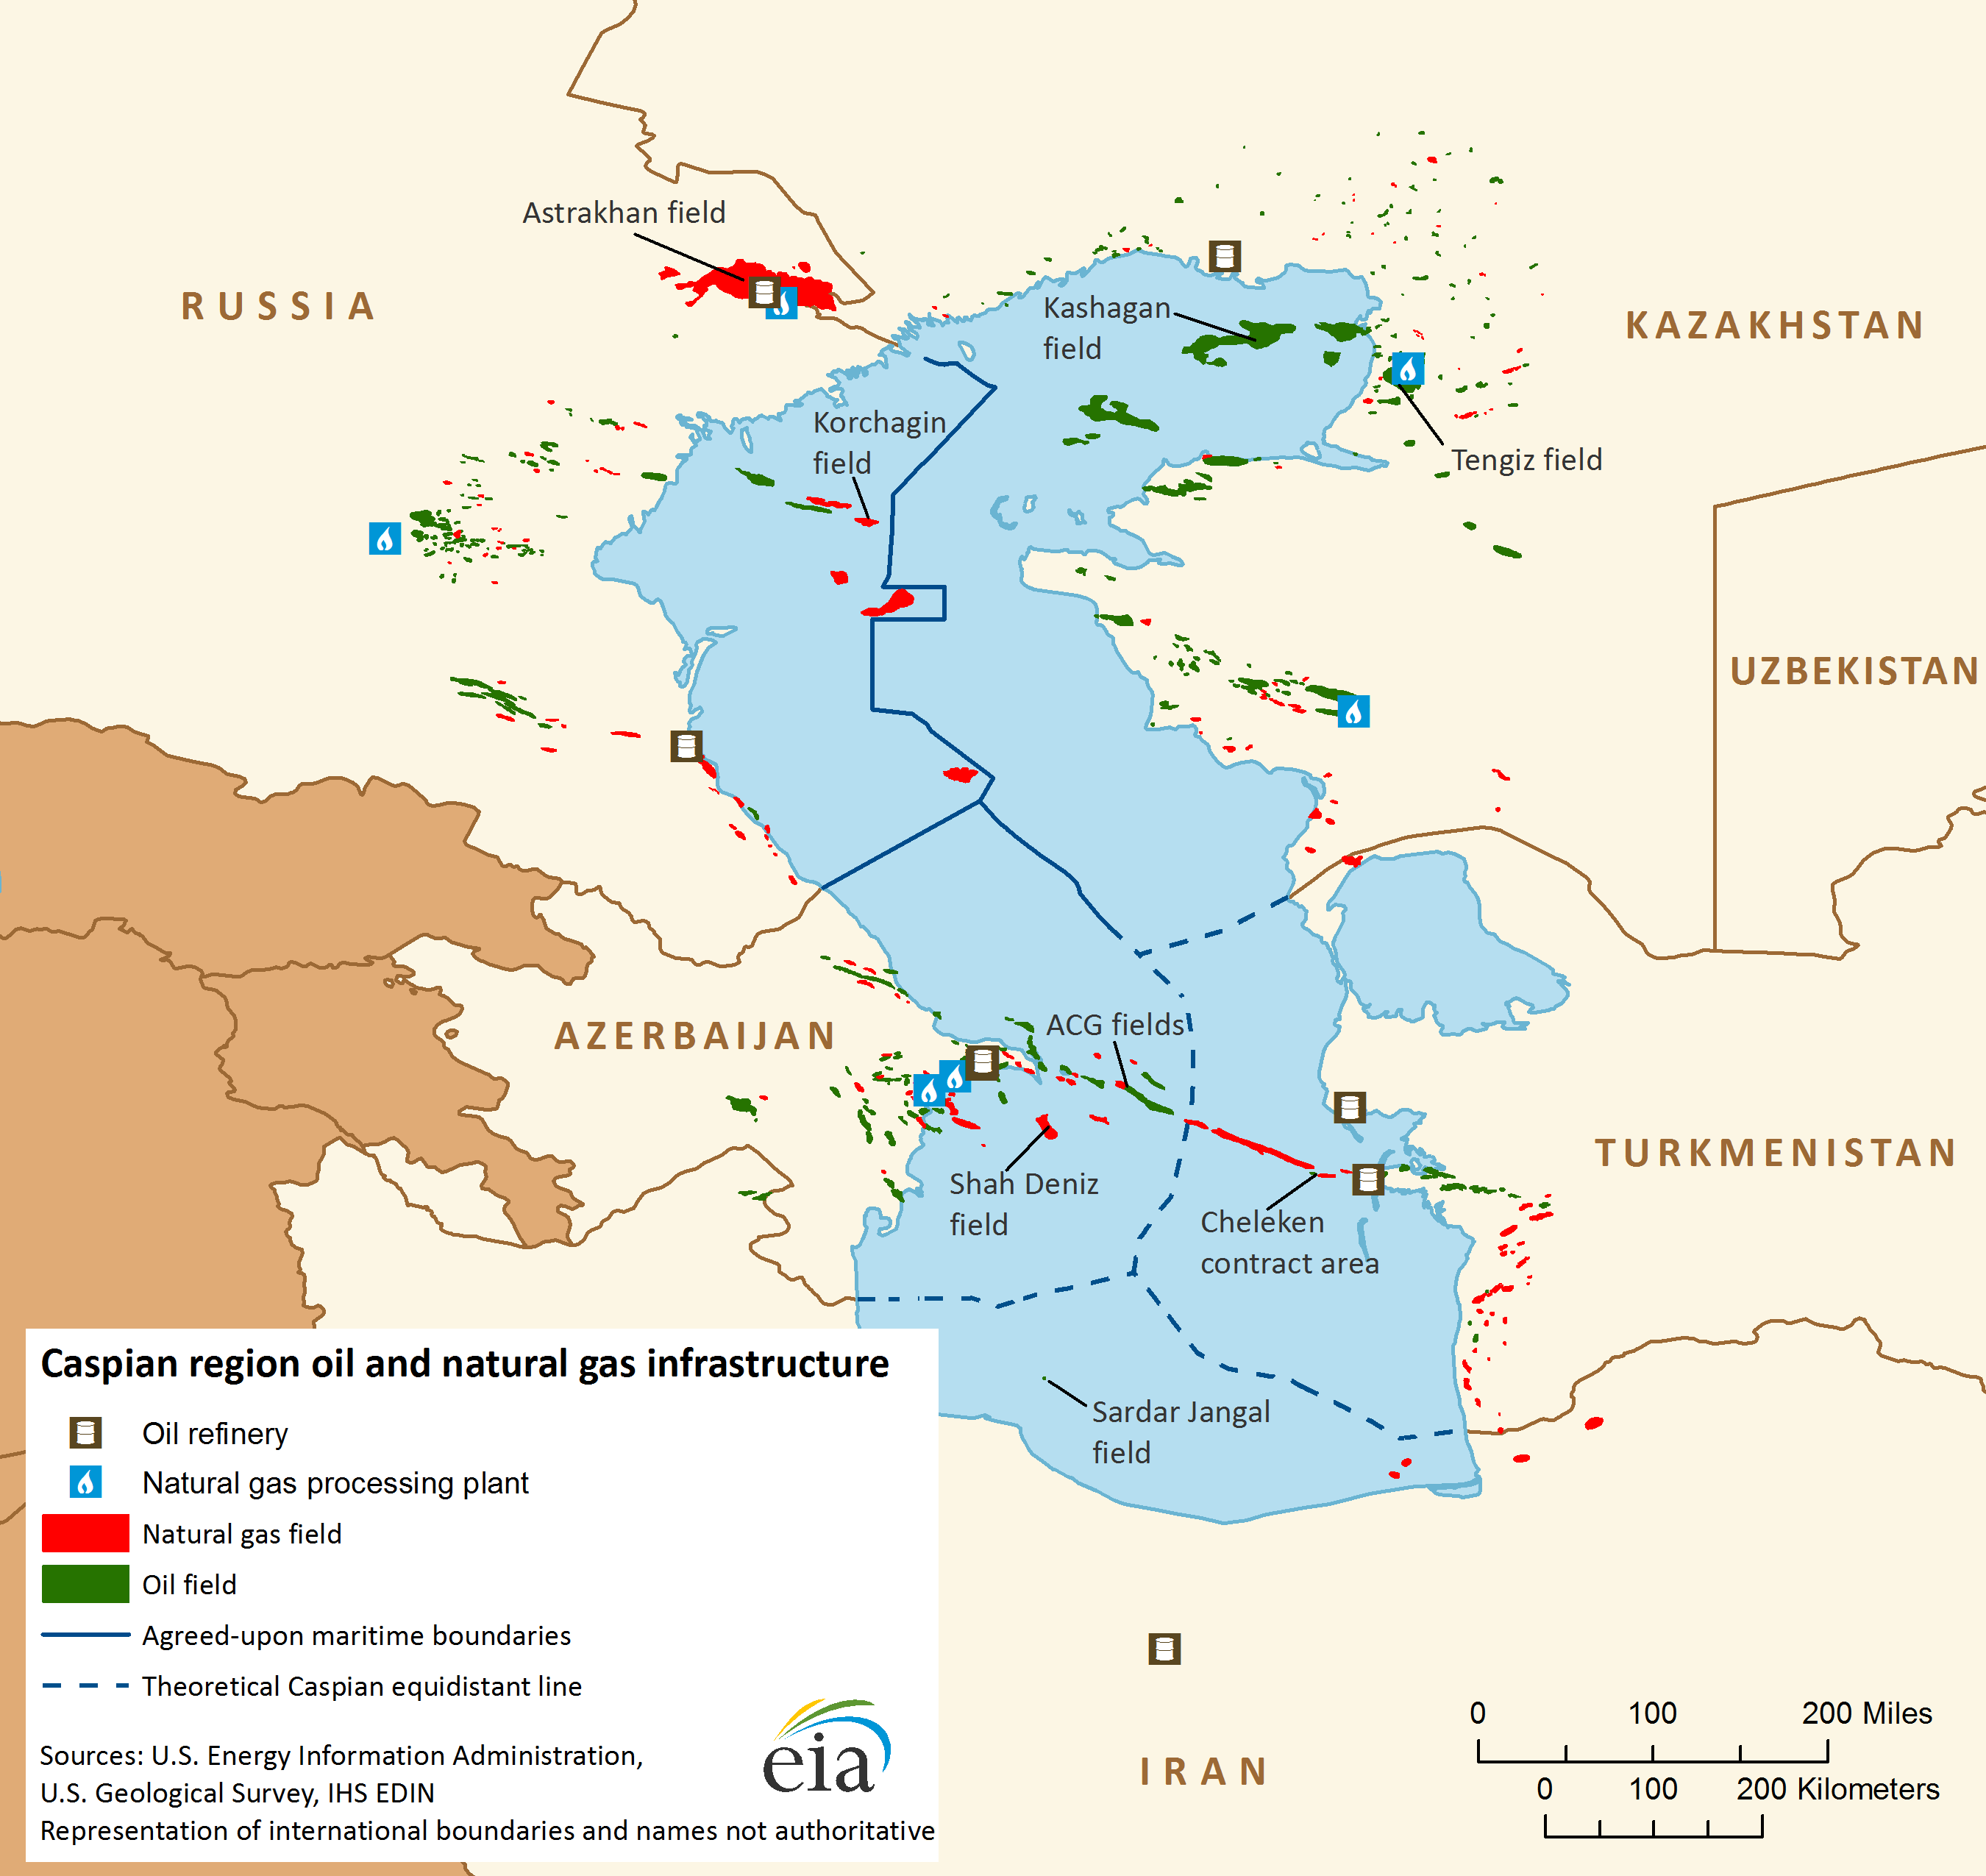 Caspian_region_oil_and_natural_gas_infrastructure.png